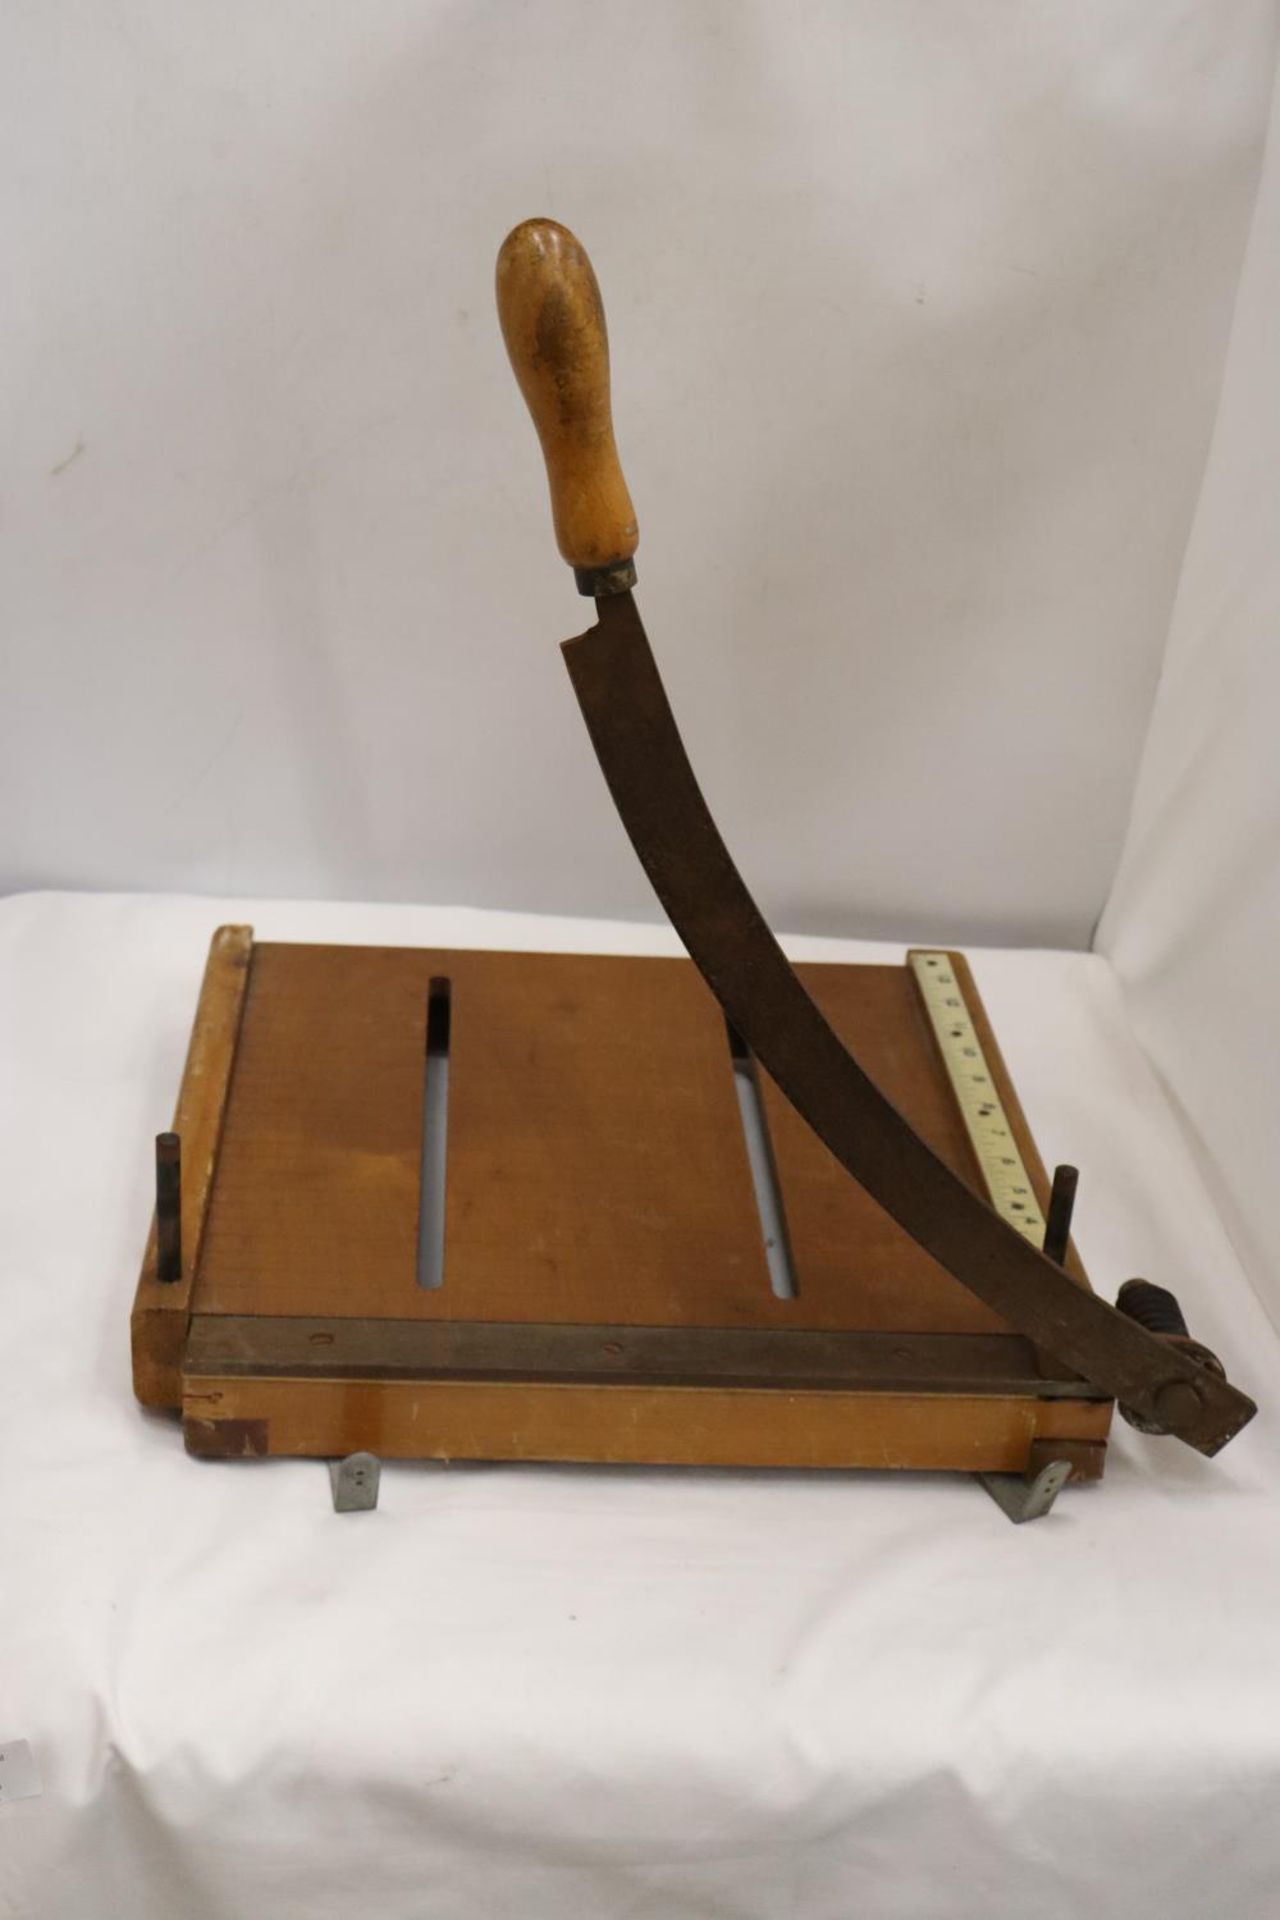 A VINTAGE WOODEN GUILLOTINE - Image 2 of 5